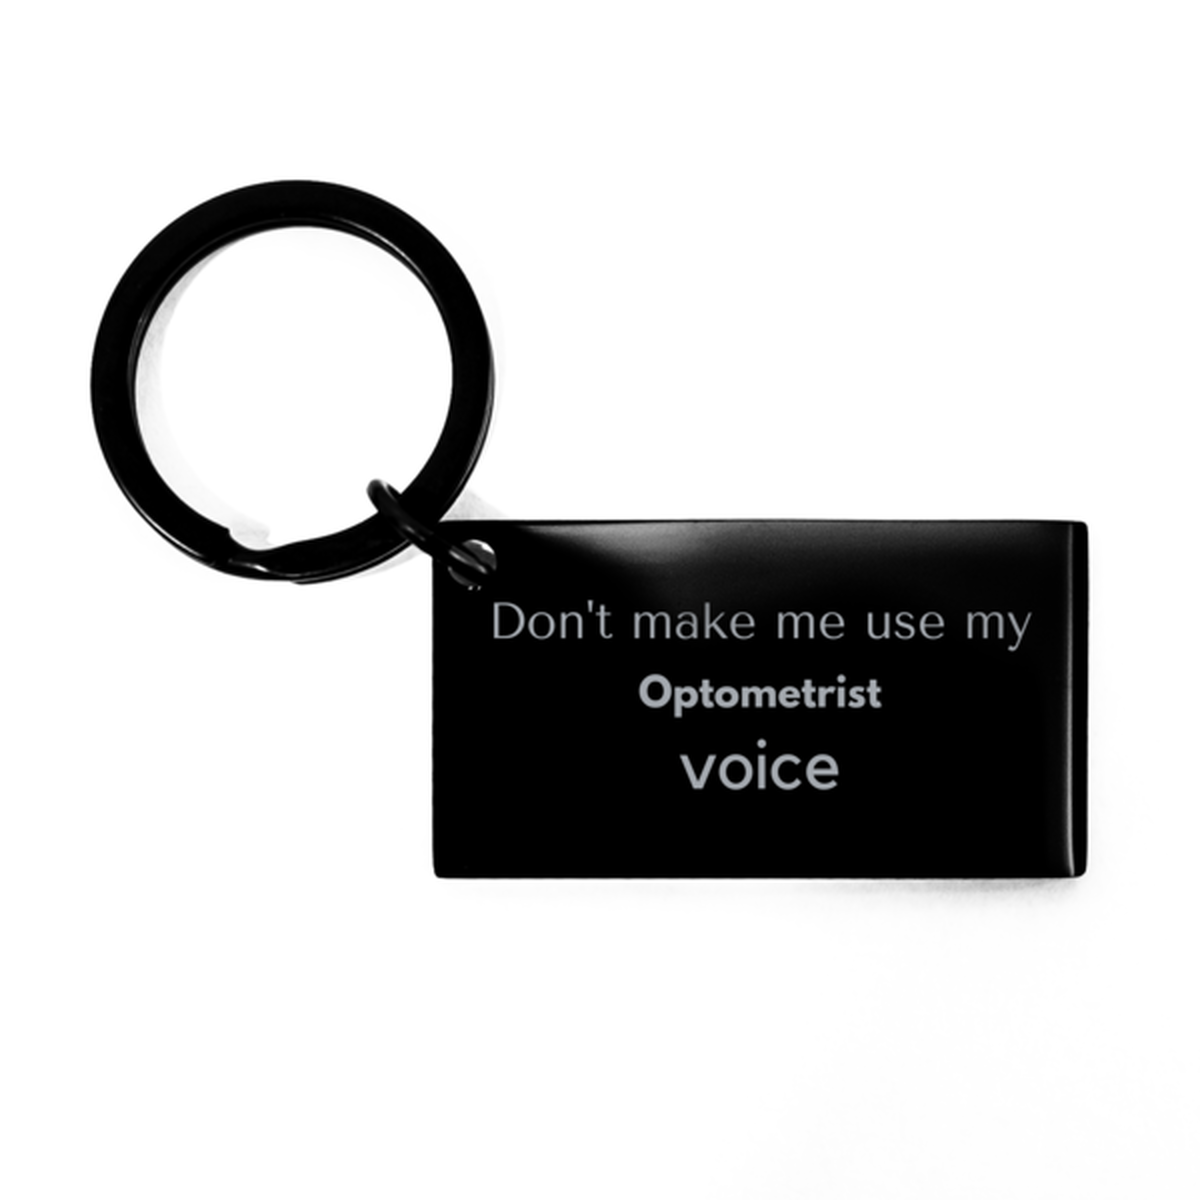 Don't make me use my Optometrist voice, Sarcasm Optometrist Gifts, Christmas Optometrist Keychain Birthday Unique Gifts For Optometrist Coworkers, Men, Women, Colleague, Friends